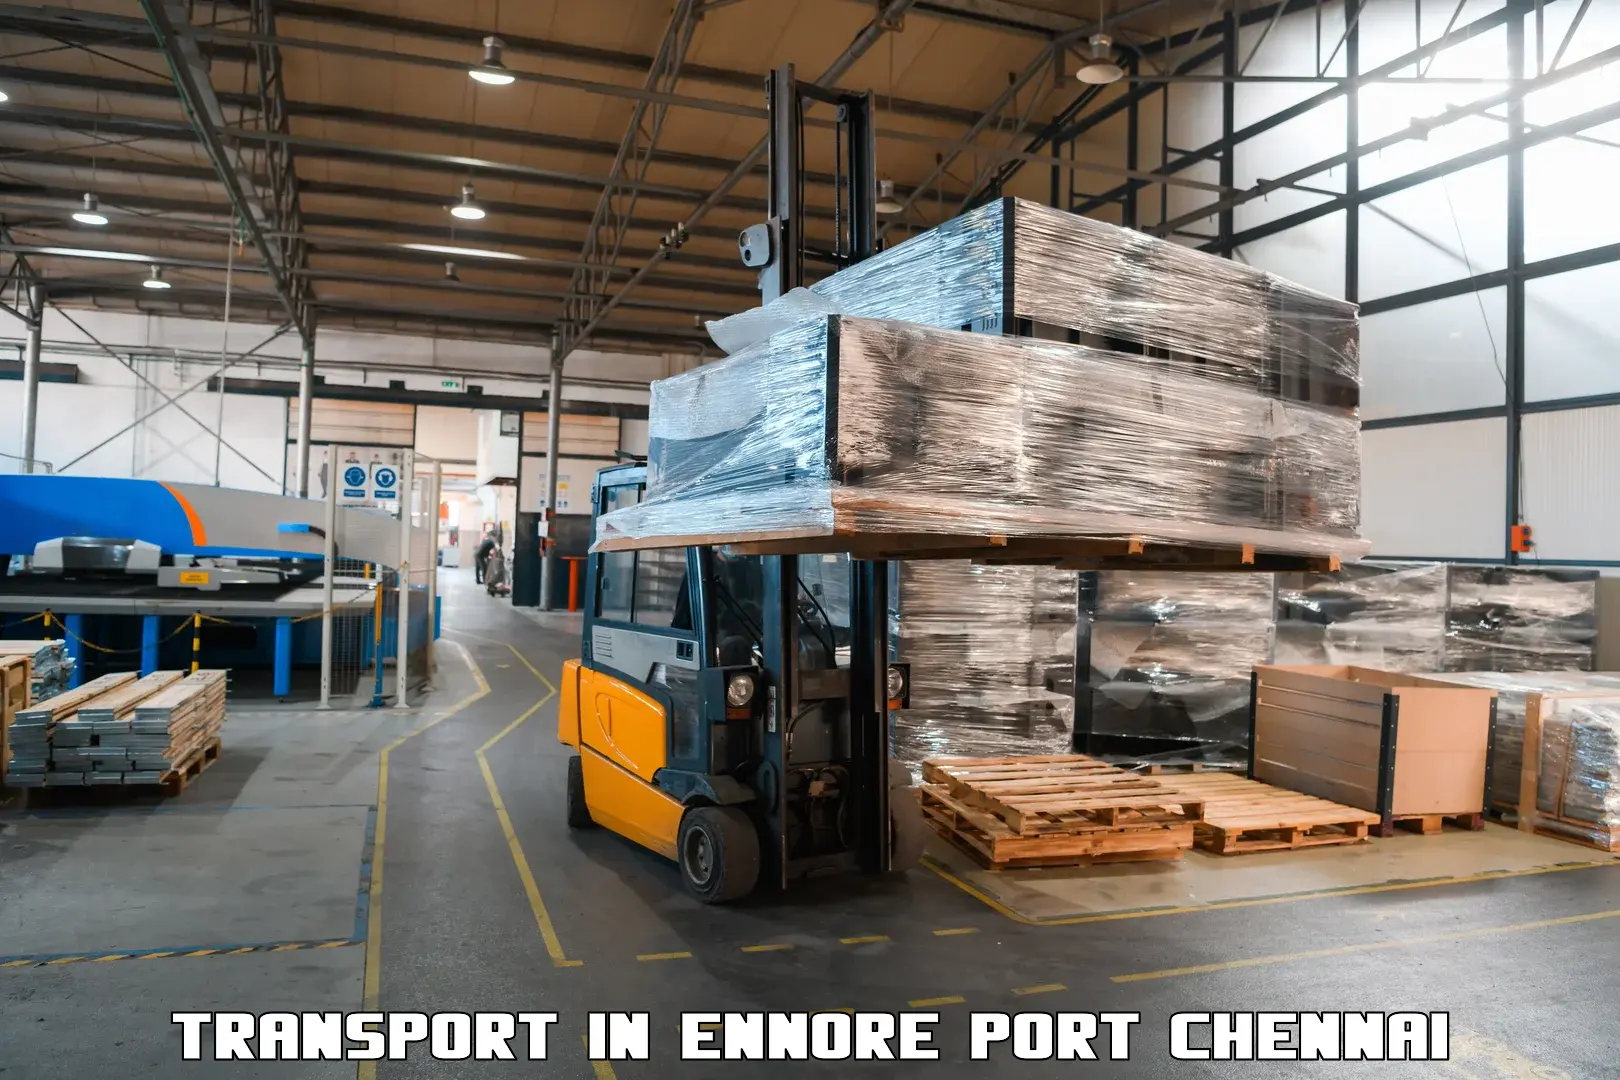 Cargo train transport services in Ennore Port Chennai